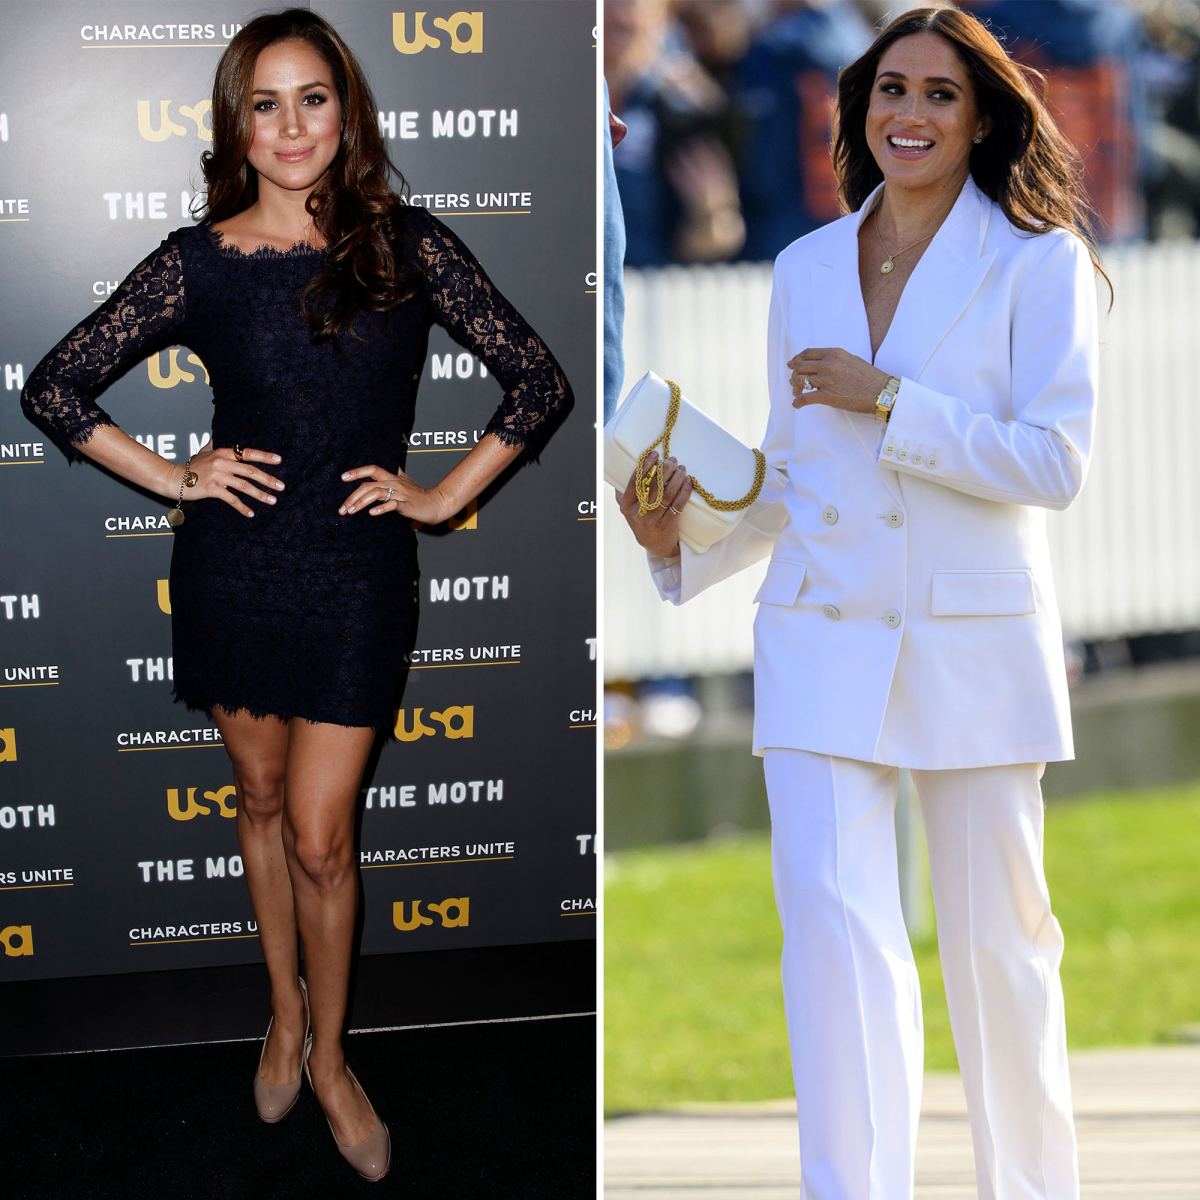 Meghan Markle's Style Evolution, From Hollywood to Post-Royal Life